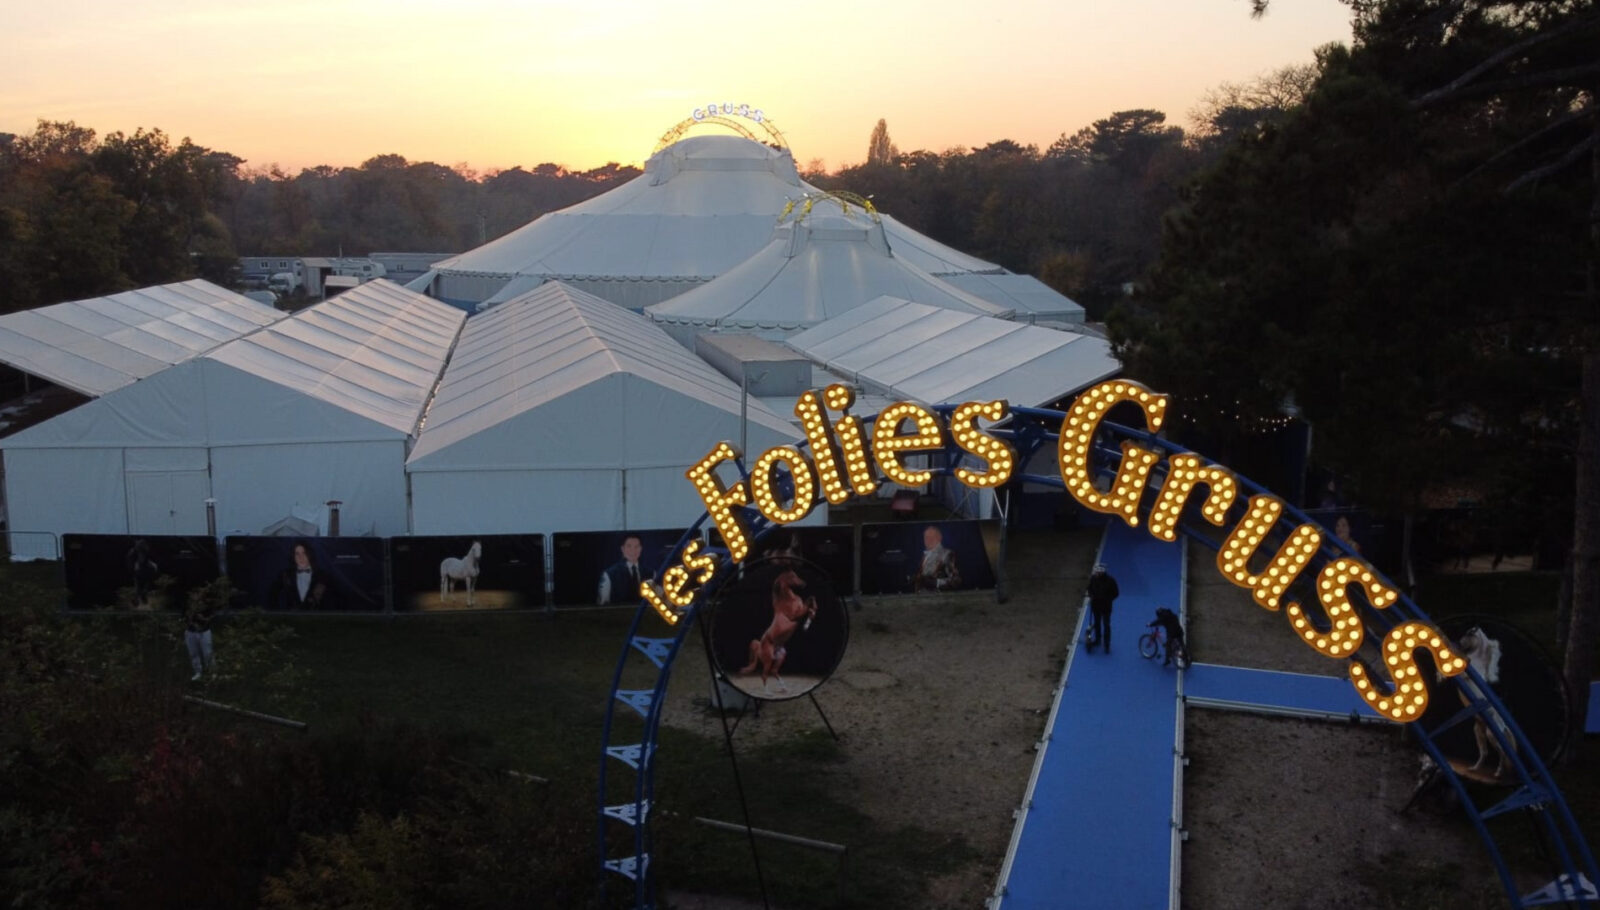 Les Folies Gruss circus sign shows the company name in lights in front of a large tent complex outside of Paris